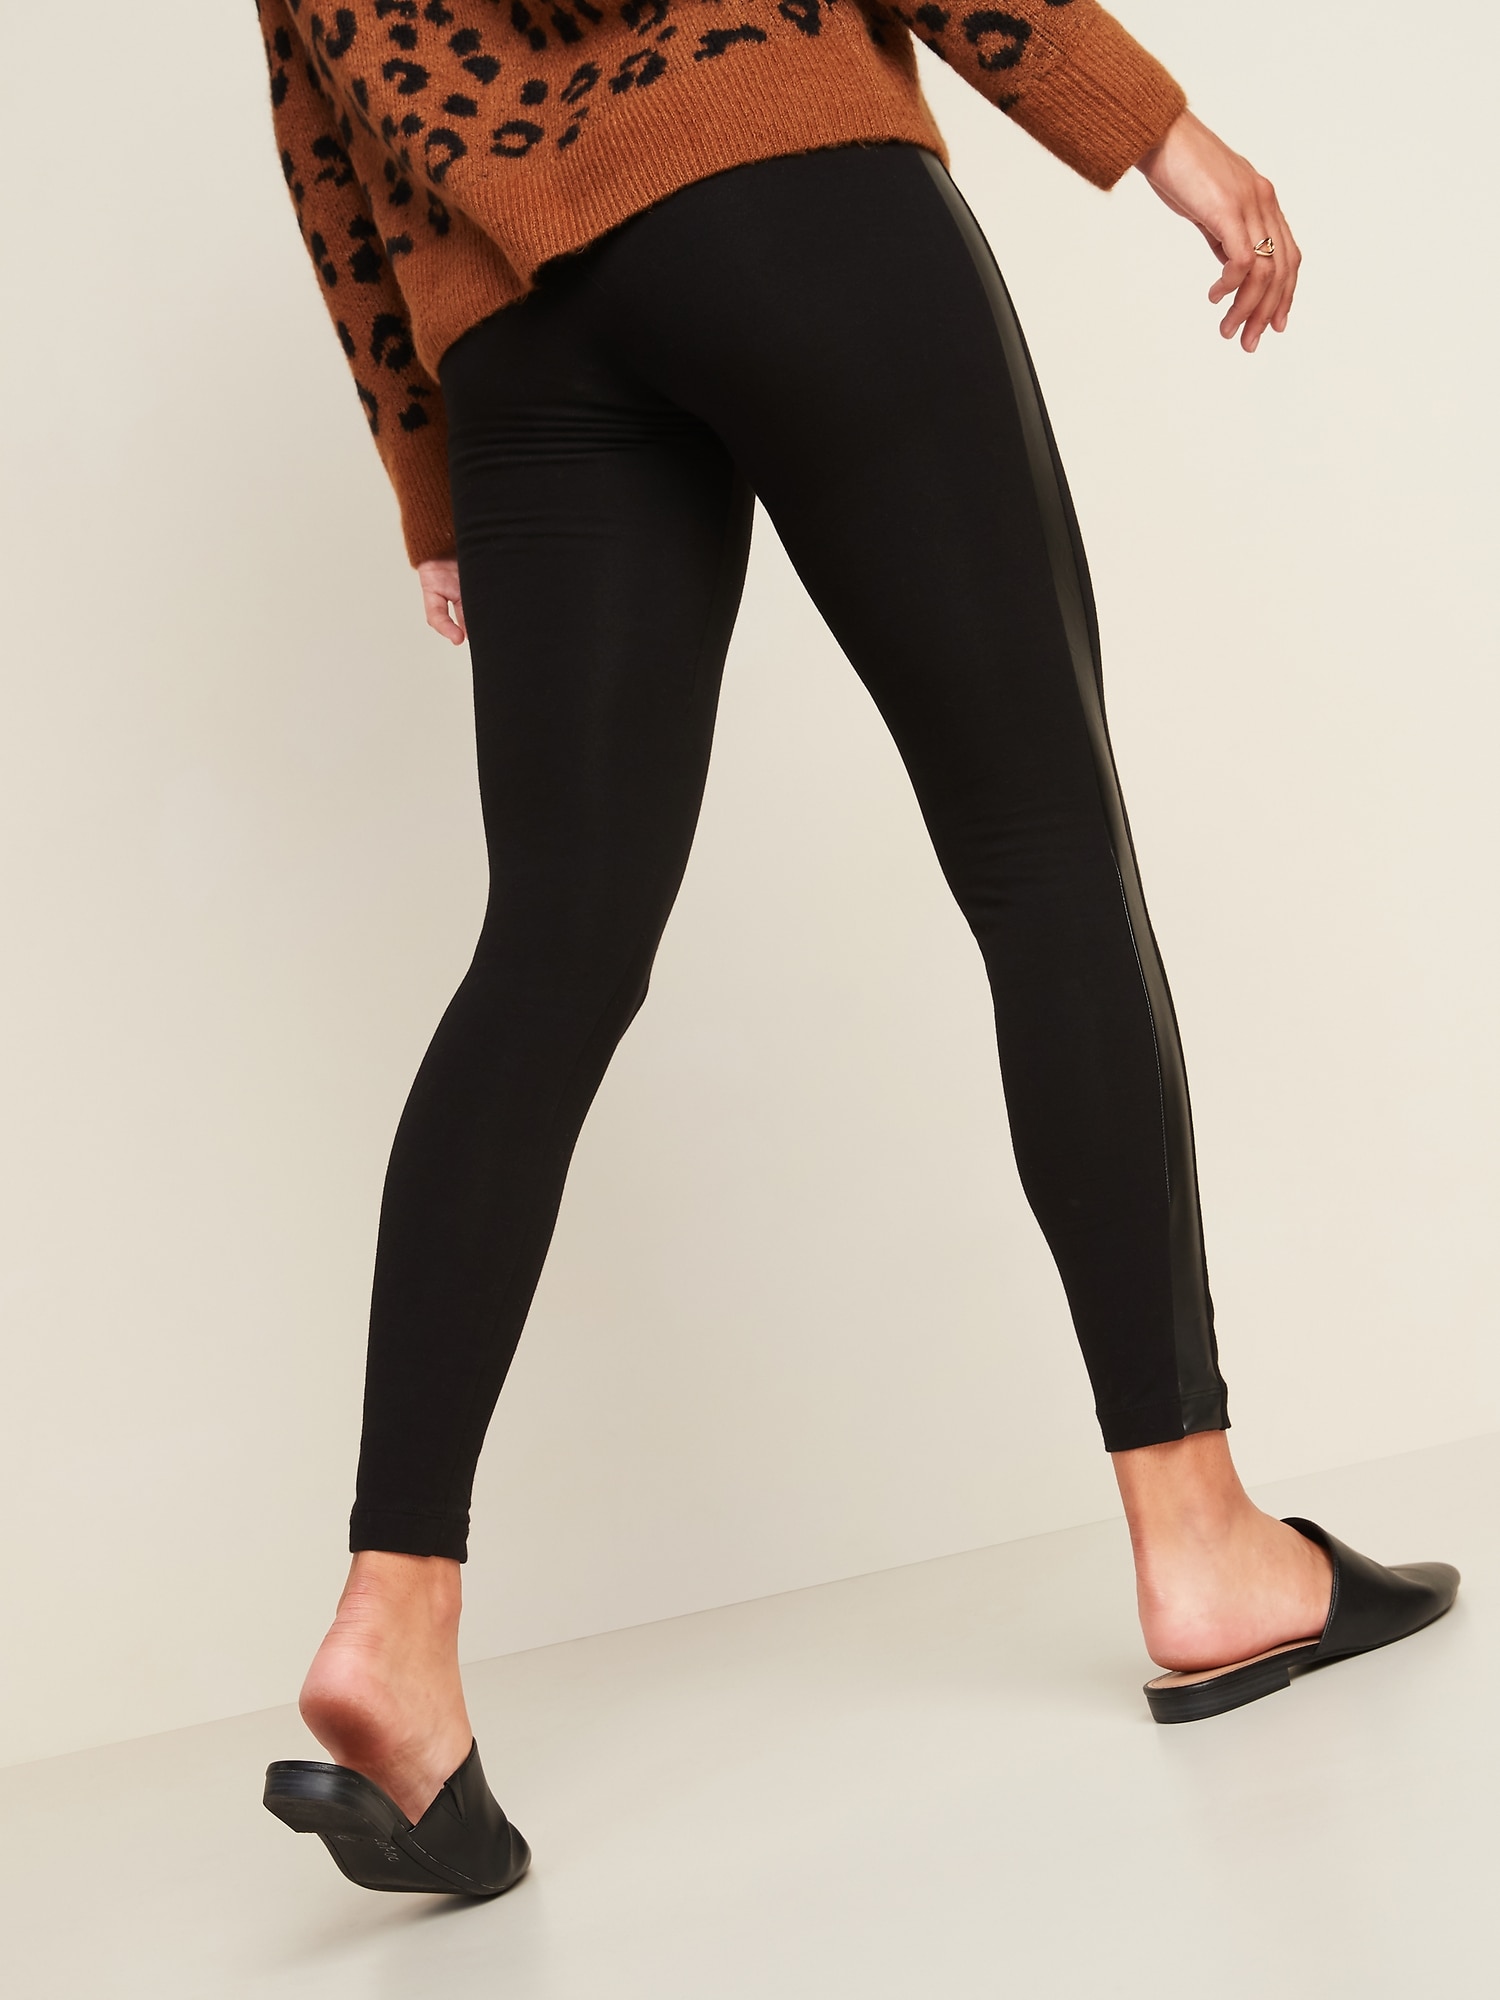 High-Waisted Faux-Leather Panel Leggings For Women